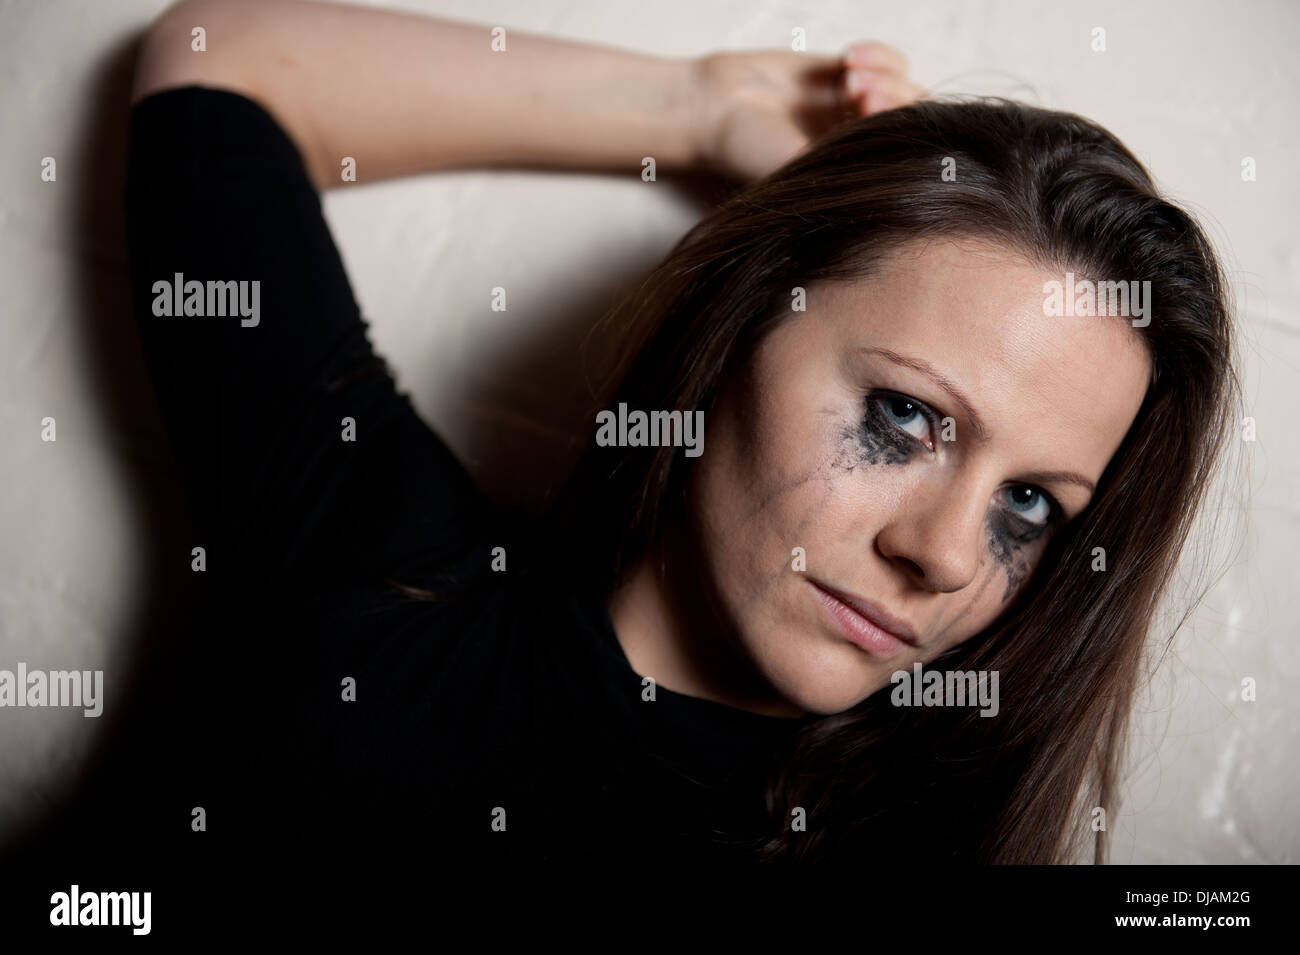 Tearful young woman against a white wall, with her make up running from crying. Stock Photo